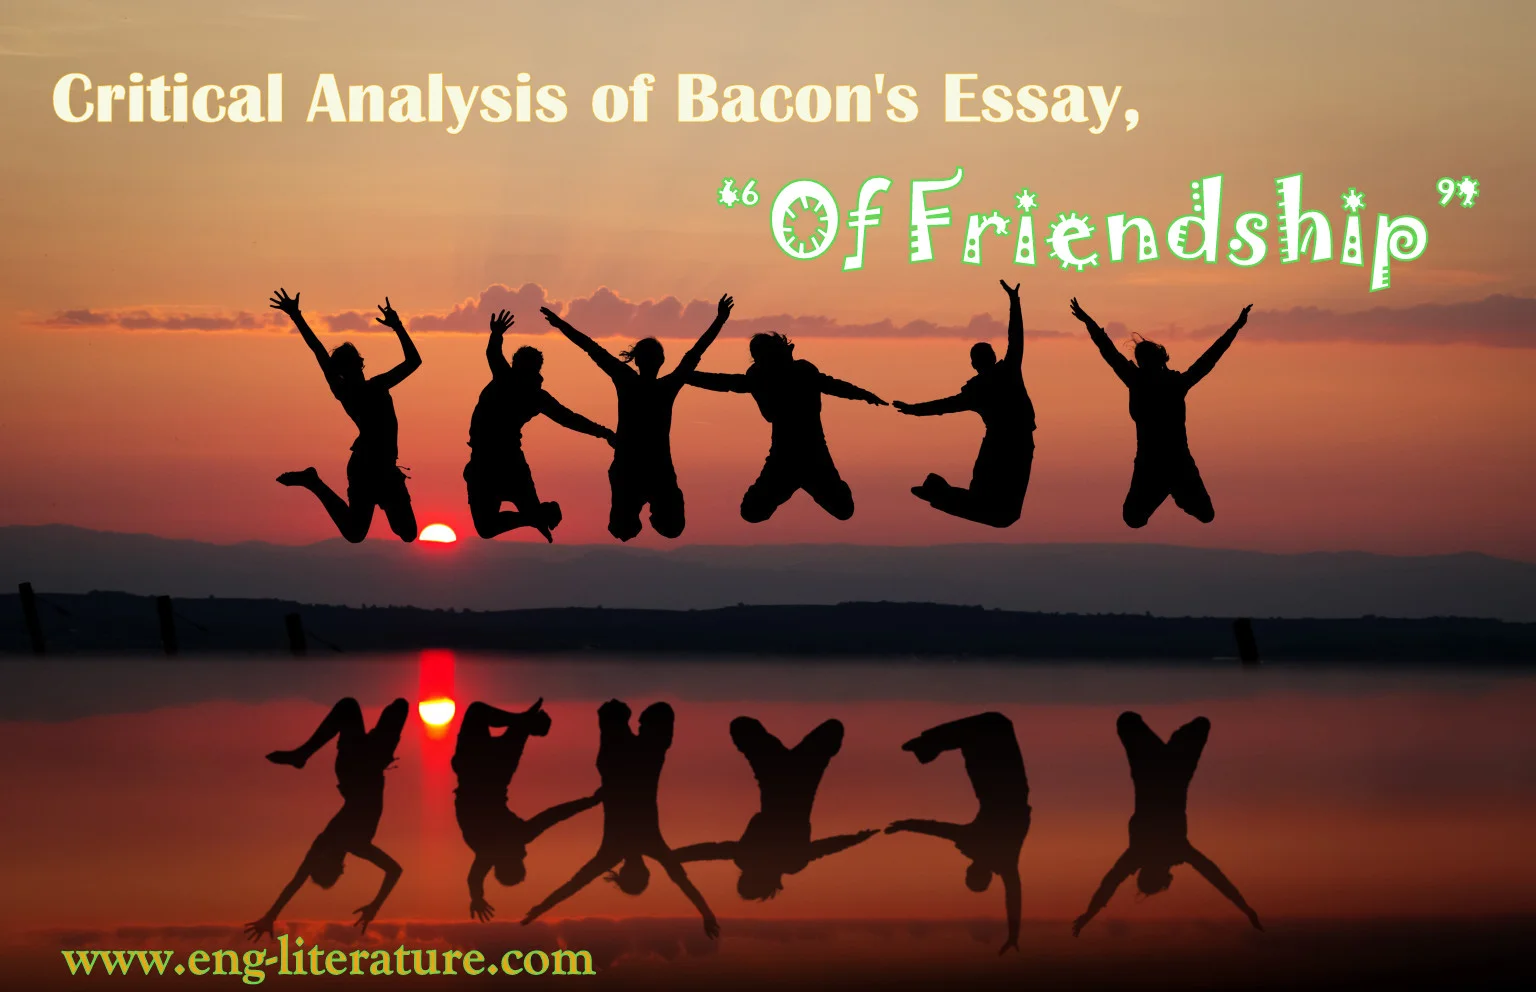 Critical Analysis of Bacon's Essay, "Of Friendship"